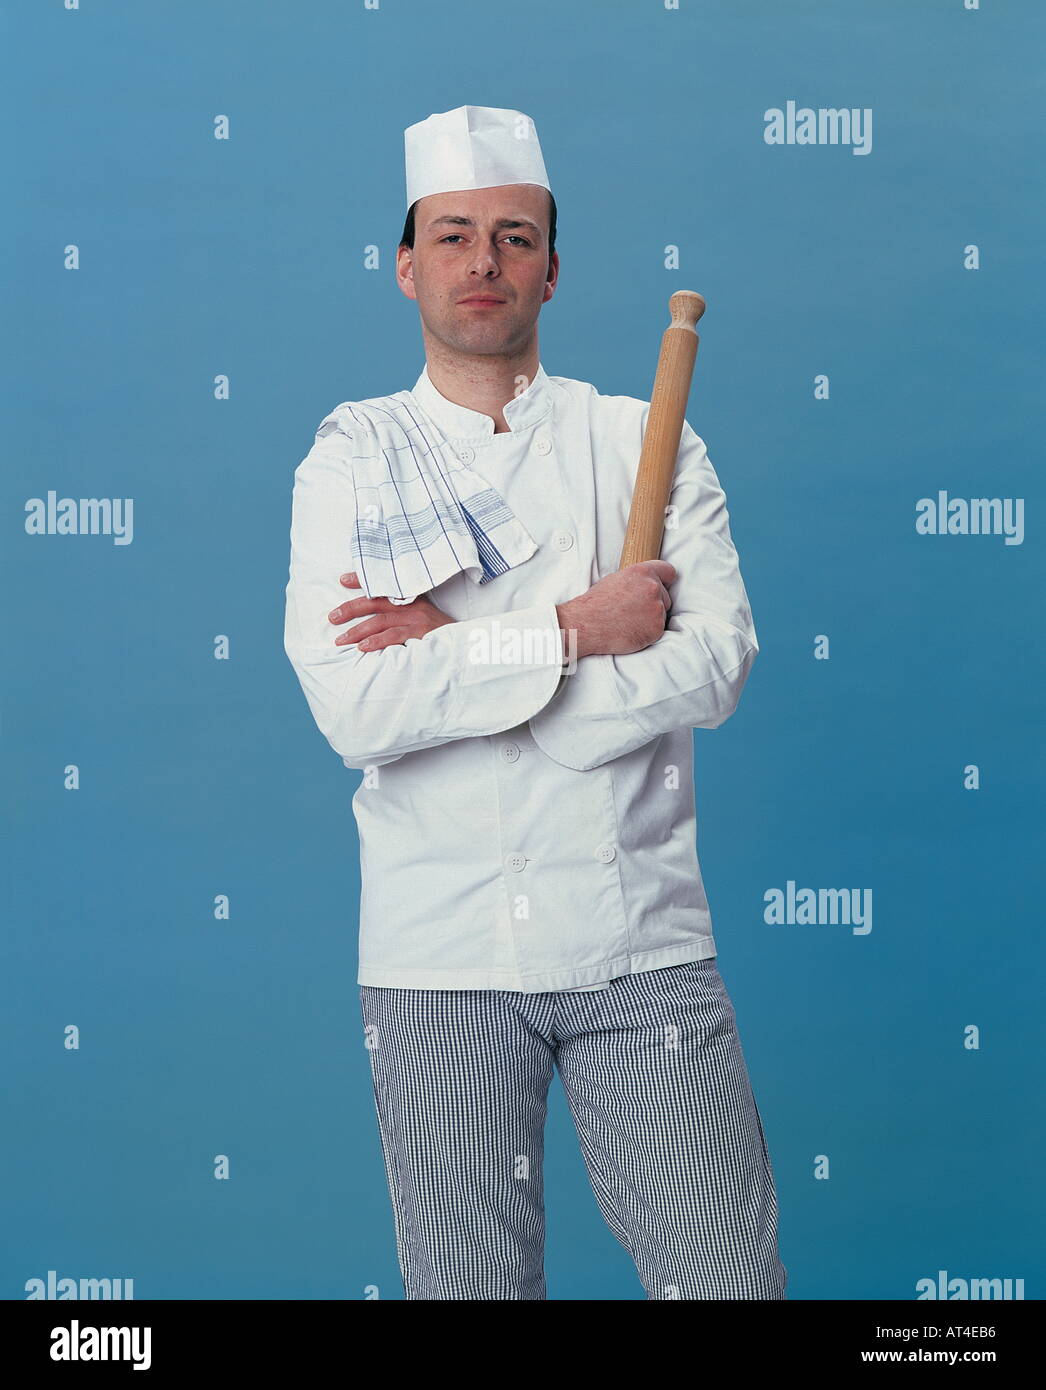 chef posing with a rolling pin Stock Photo